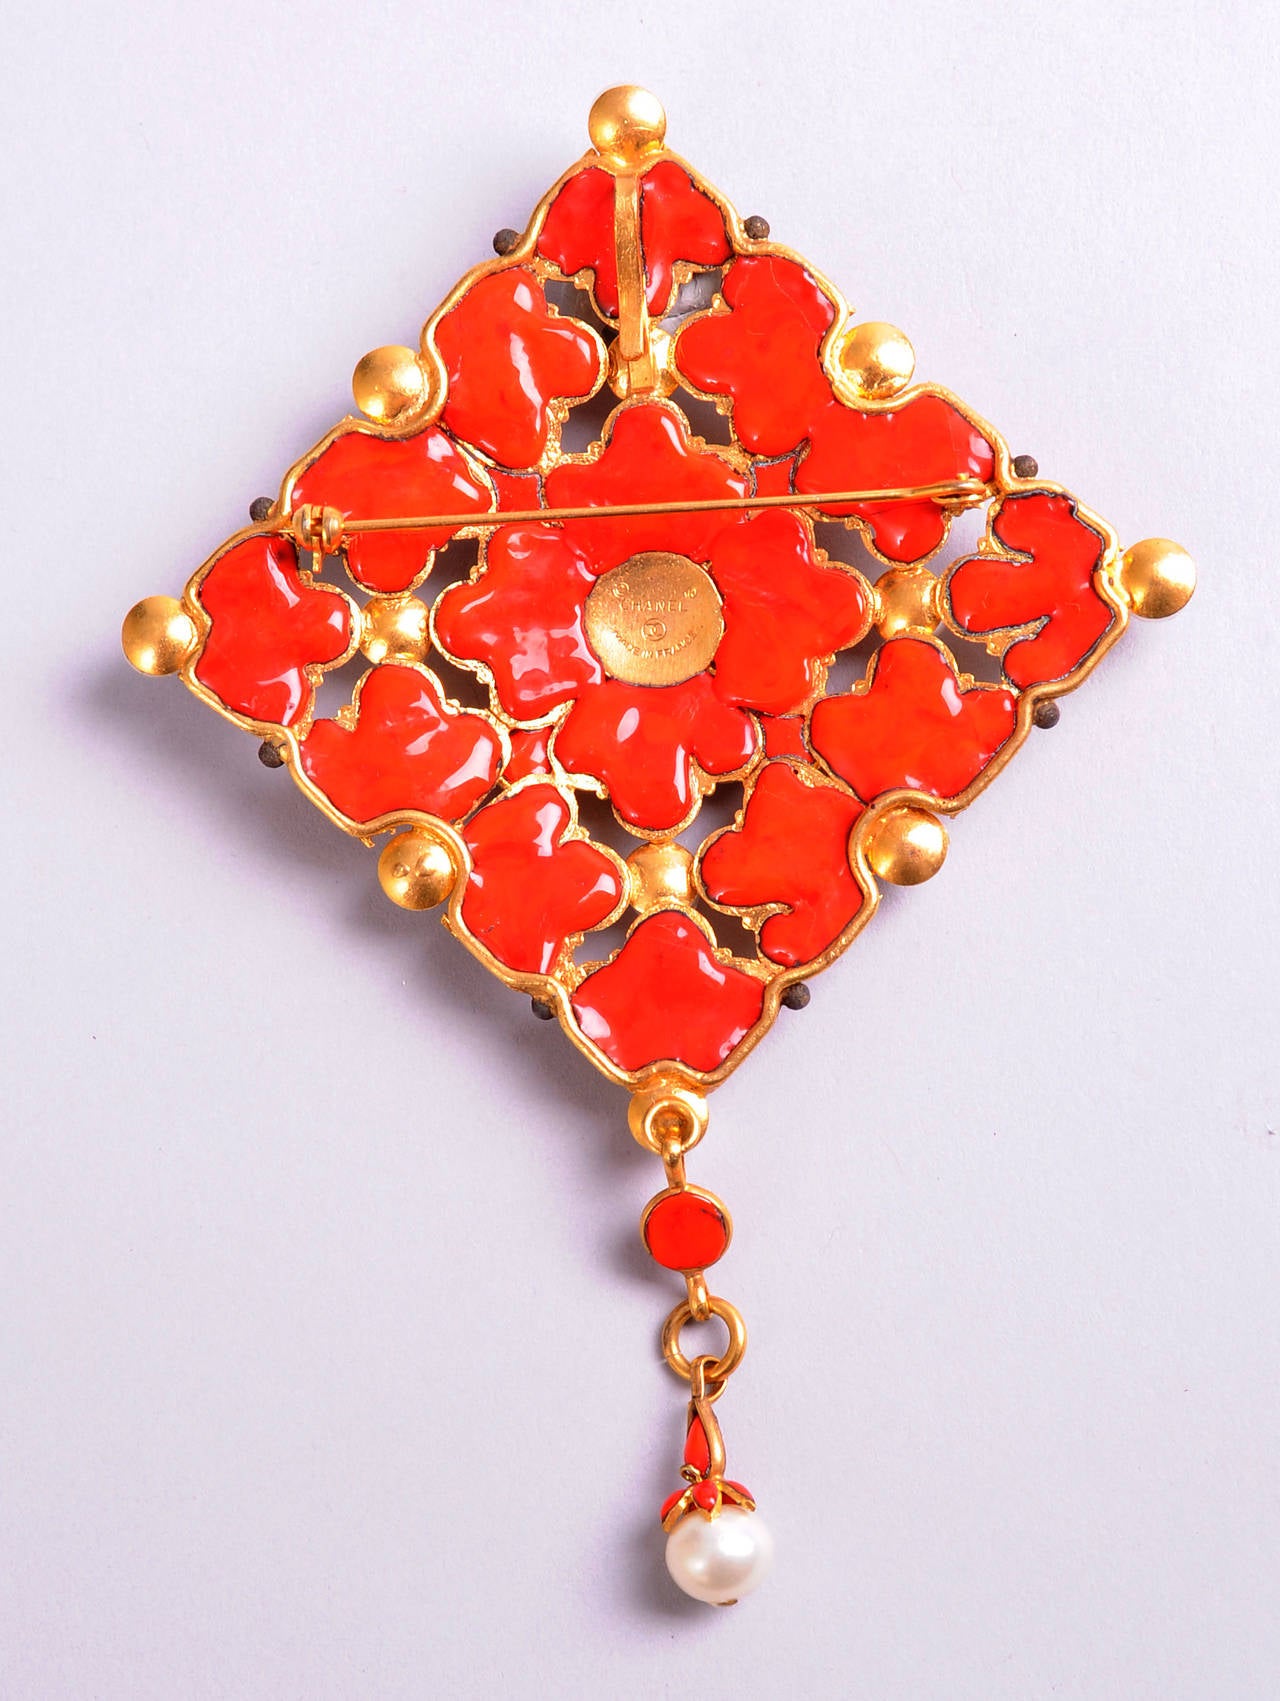 A striking diamond shaped pin or pendant in delicate gold filigree is backed with bright orange poured glass which peeks through the gold work. Pearls and orange cabochon poured glass stones add further interest. This piece is in excellent